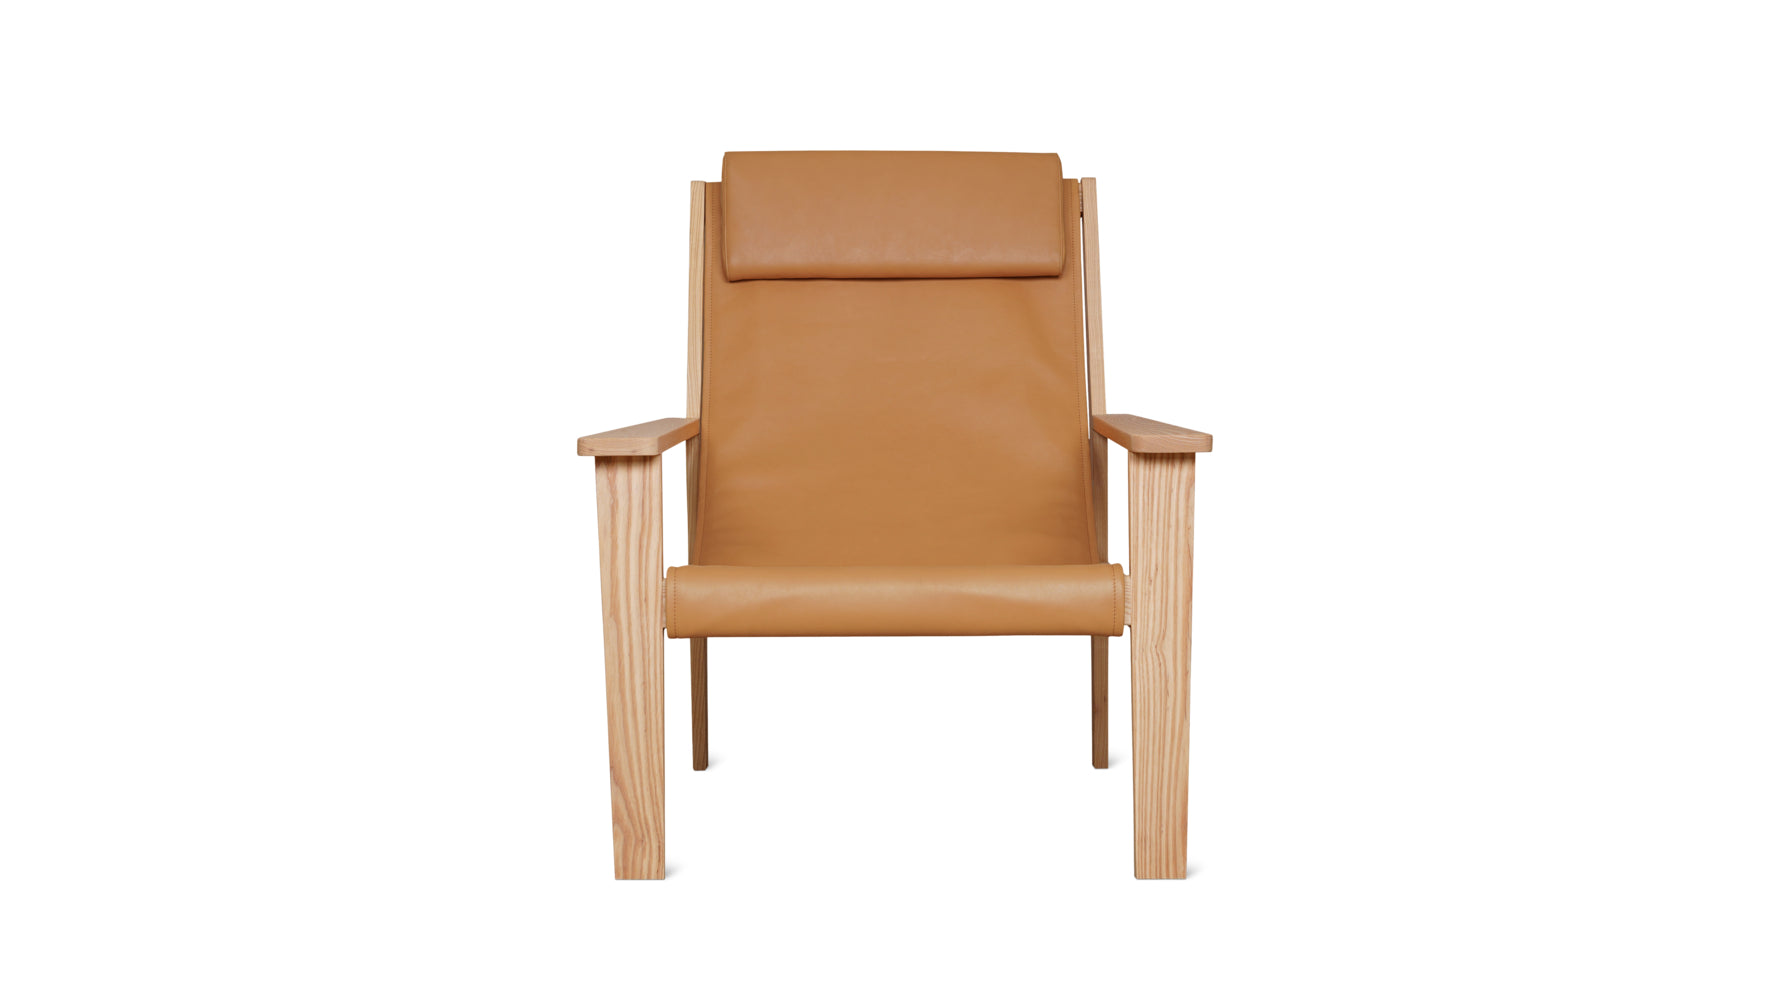 Sweet Life Sling Lounge Chair With Headrest, Terracotta Ash - Image 1